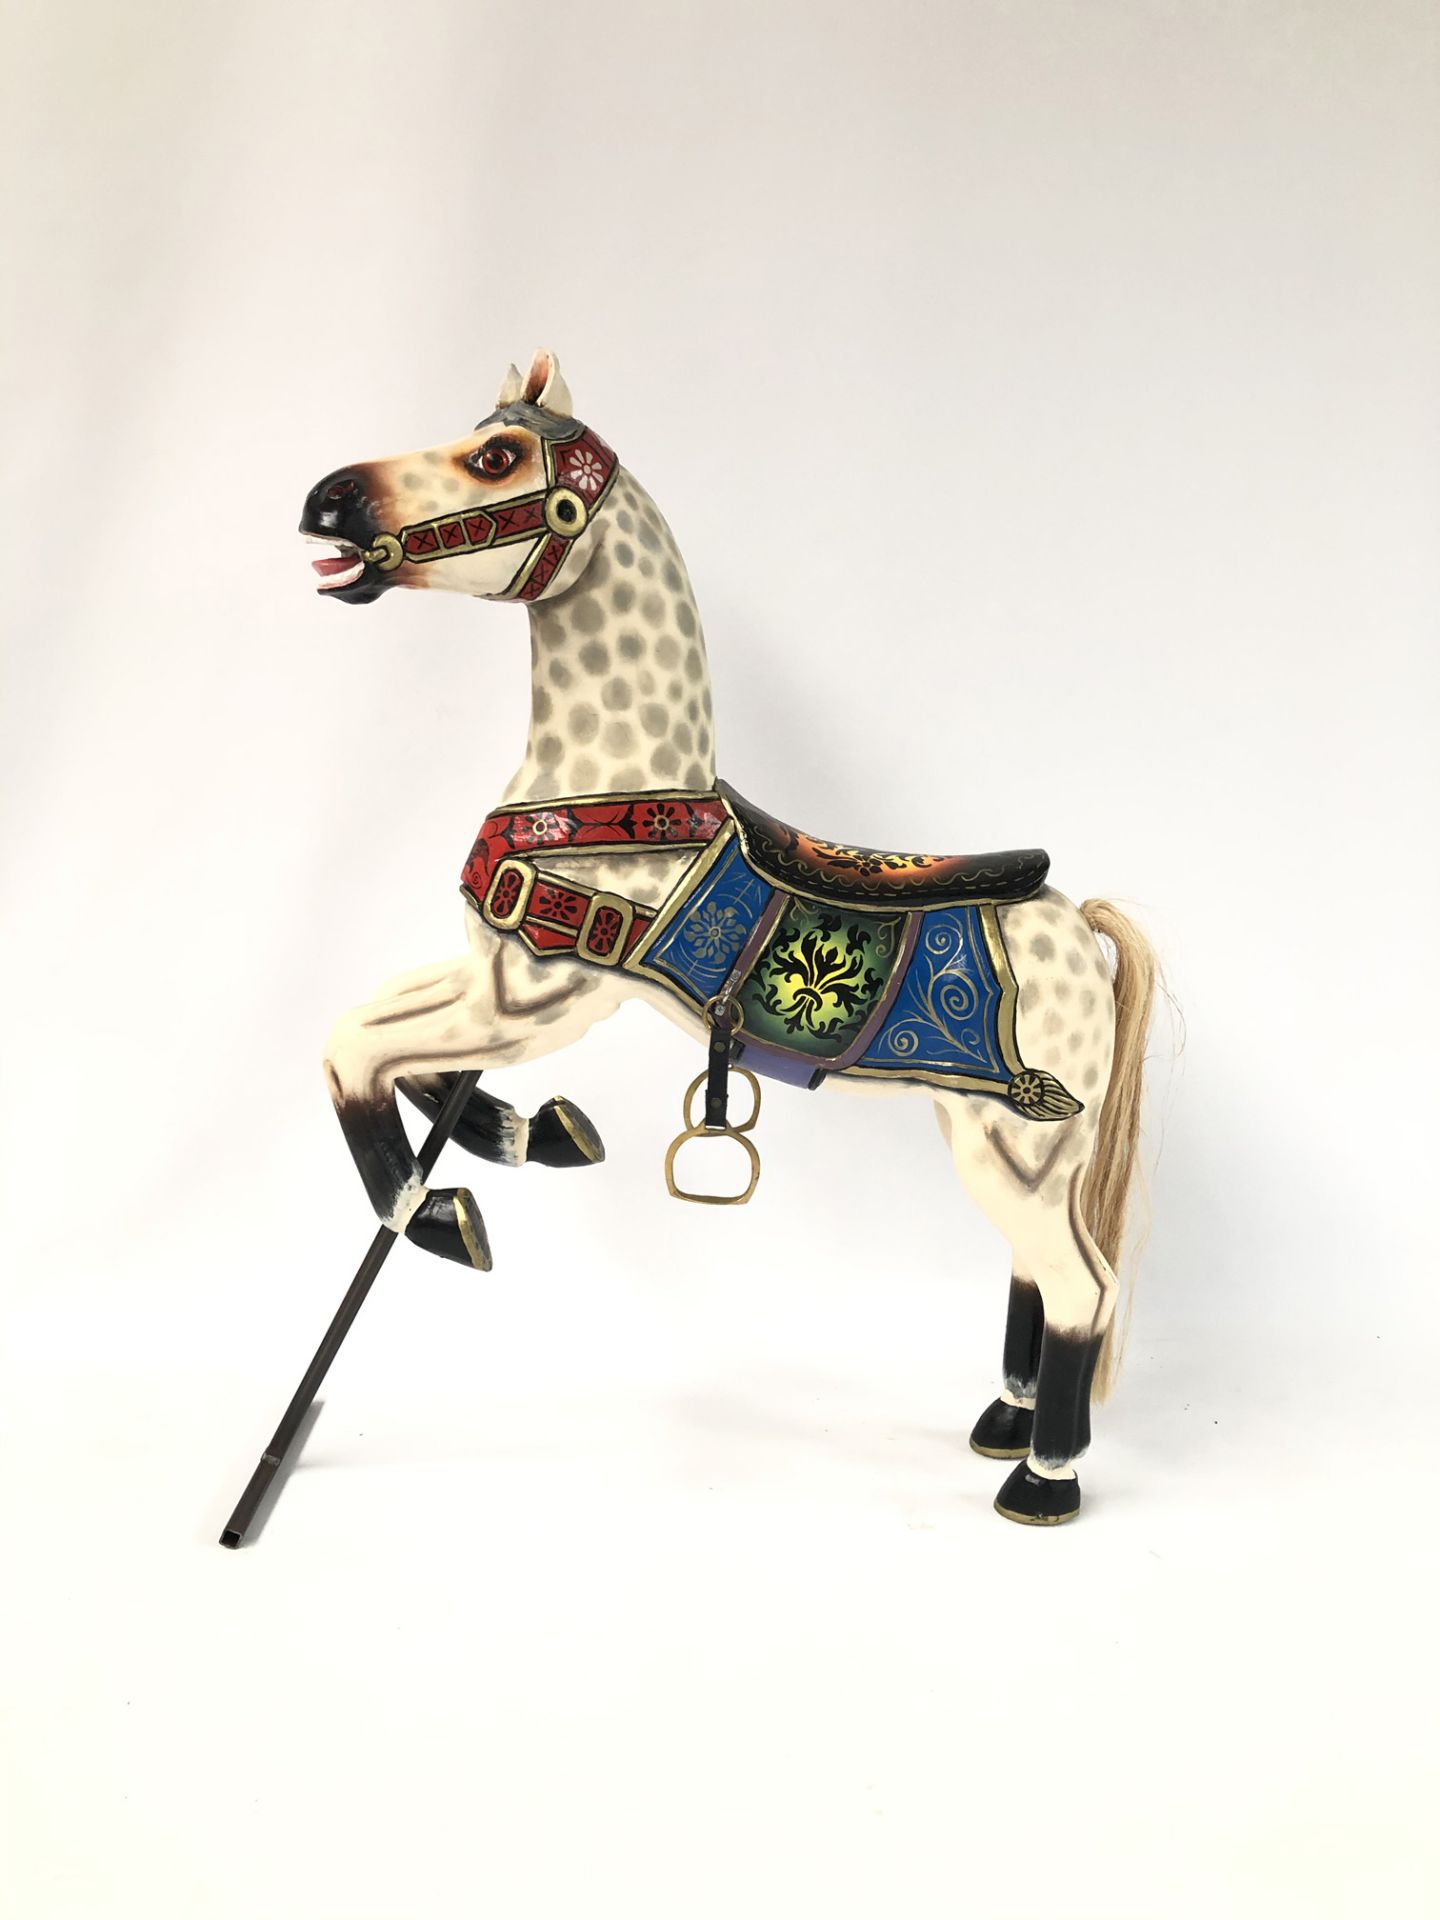 Wooden Carousel Horse from Later Half of 20th Century - Image 3 of 4